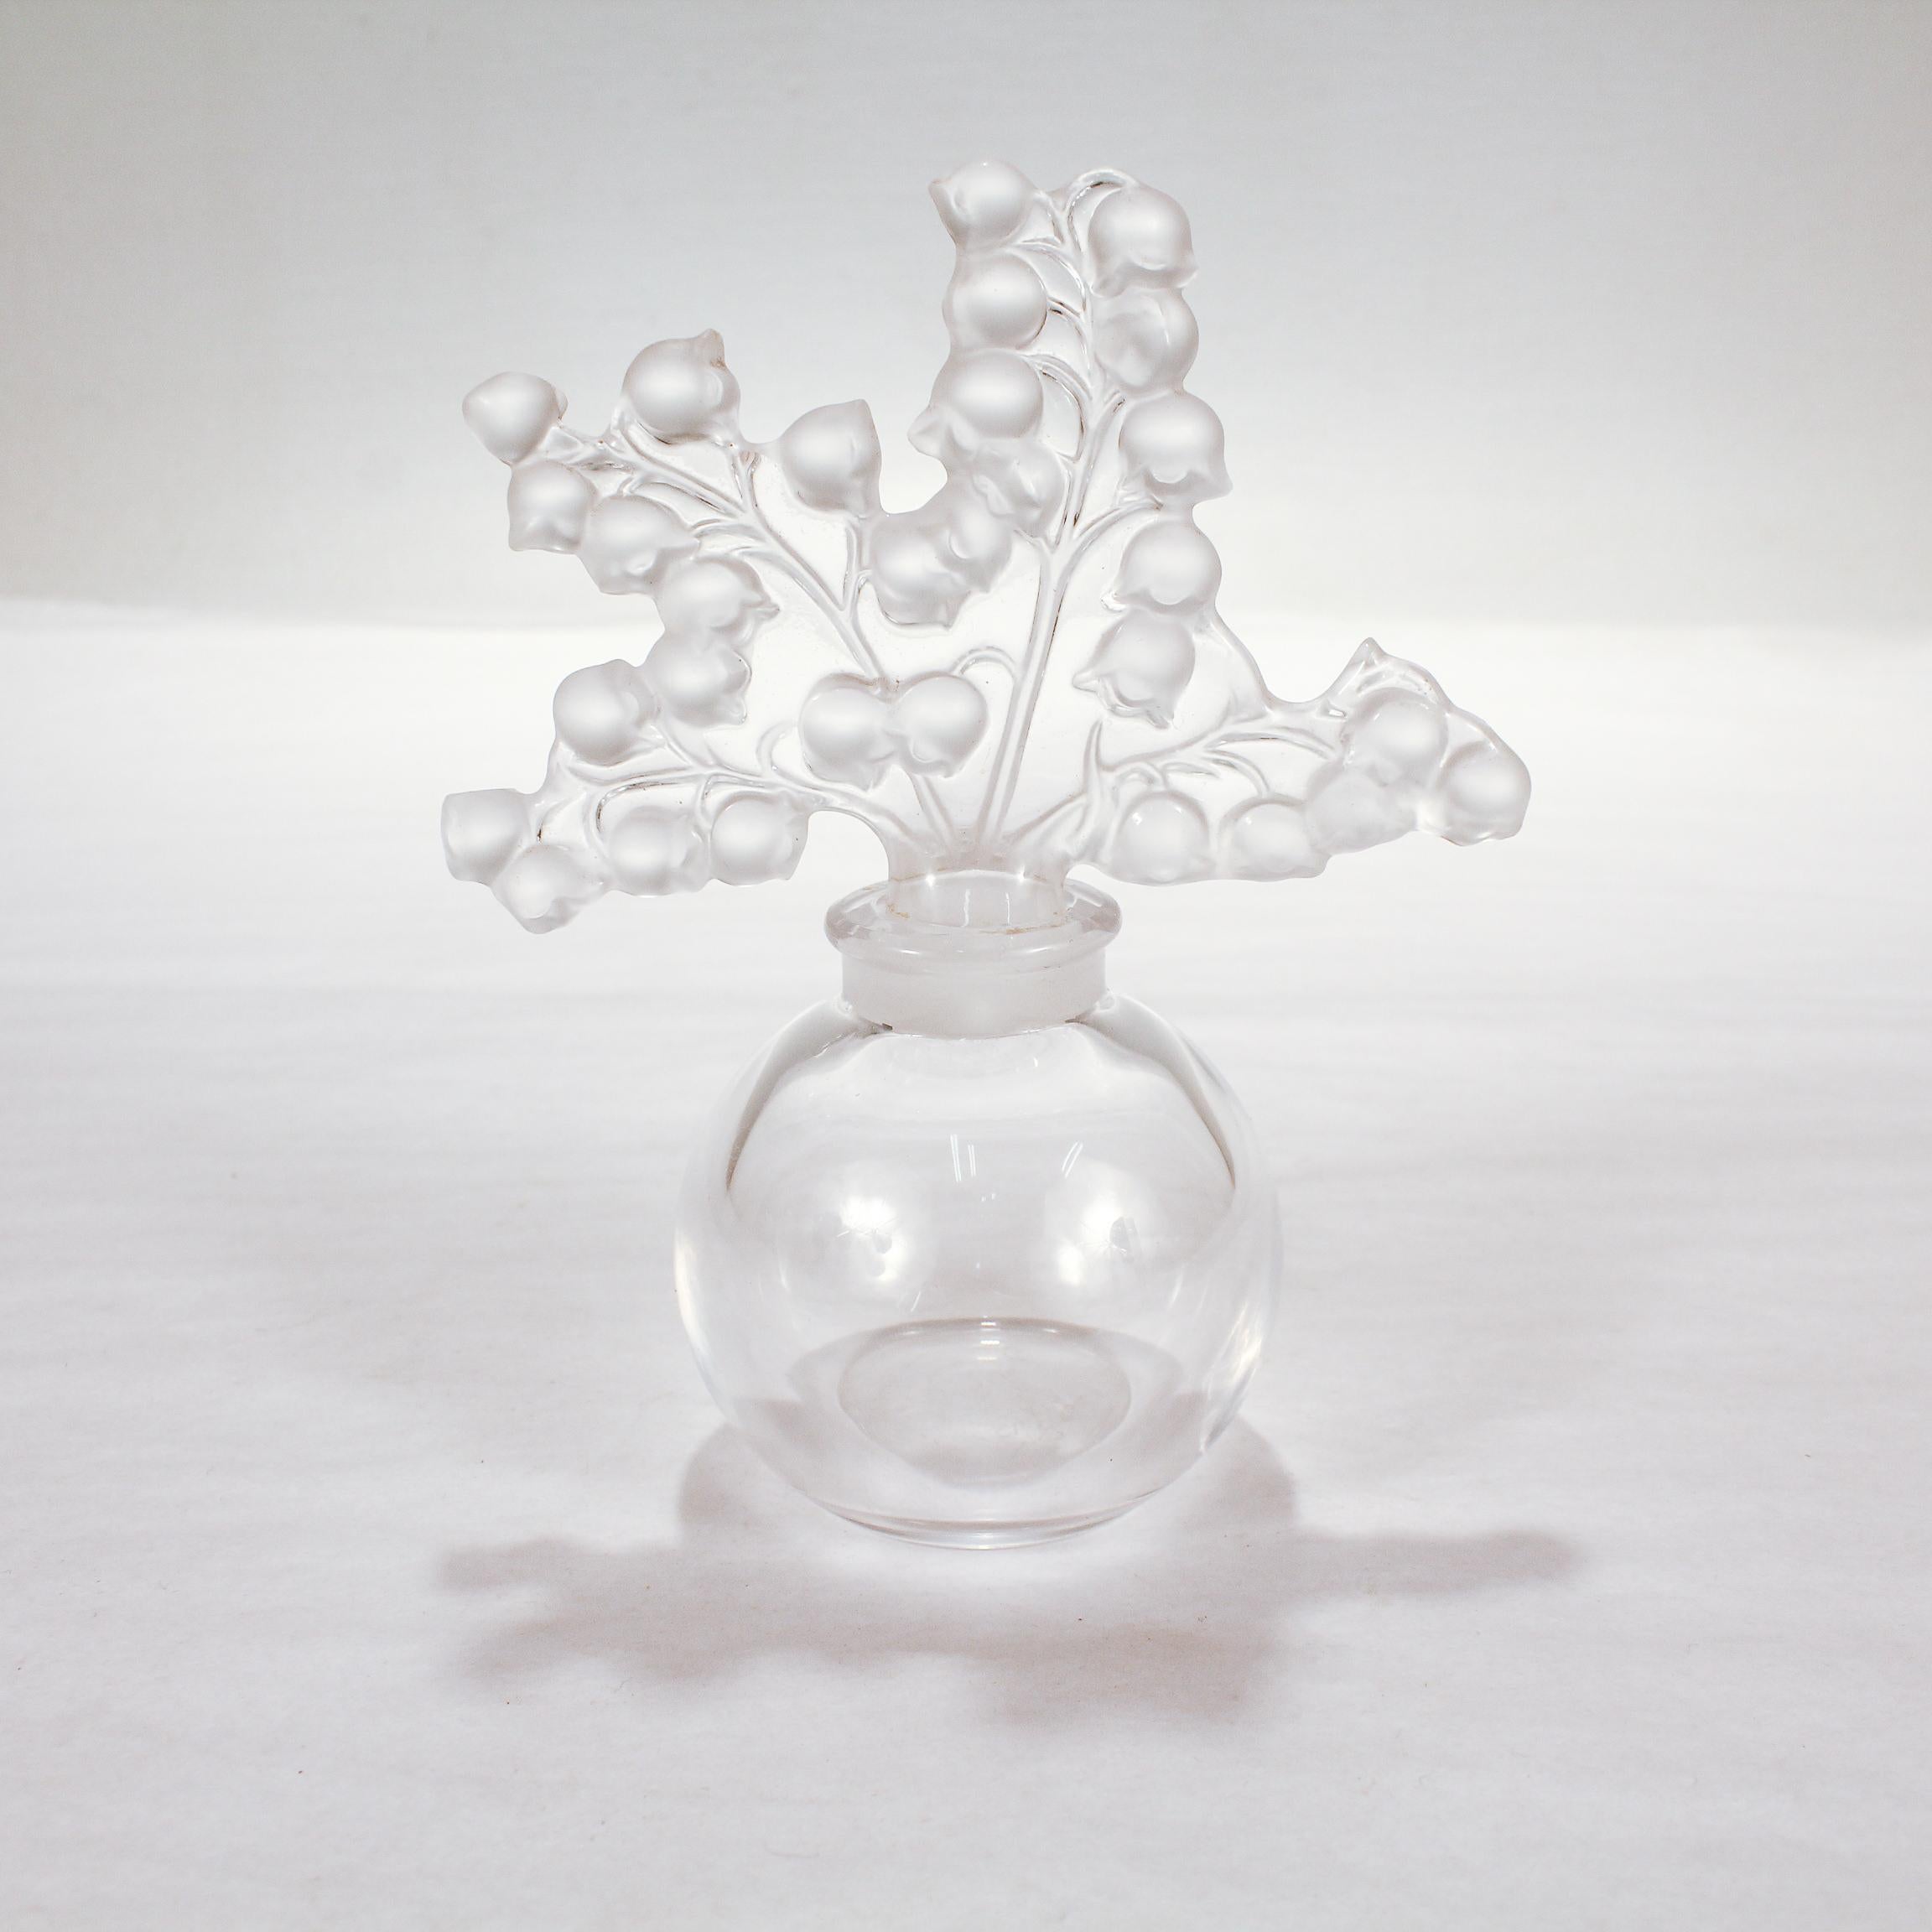 A fine art glass perfume bottle.

By Lalique.

Entitled 'Clairefontaine' - a reference to the Clairefontaine garden – located in the South West of Paris (France) – which was one of René Lalique's major source of inspiration. The perfume bottle